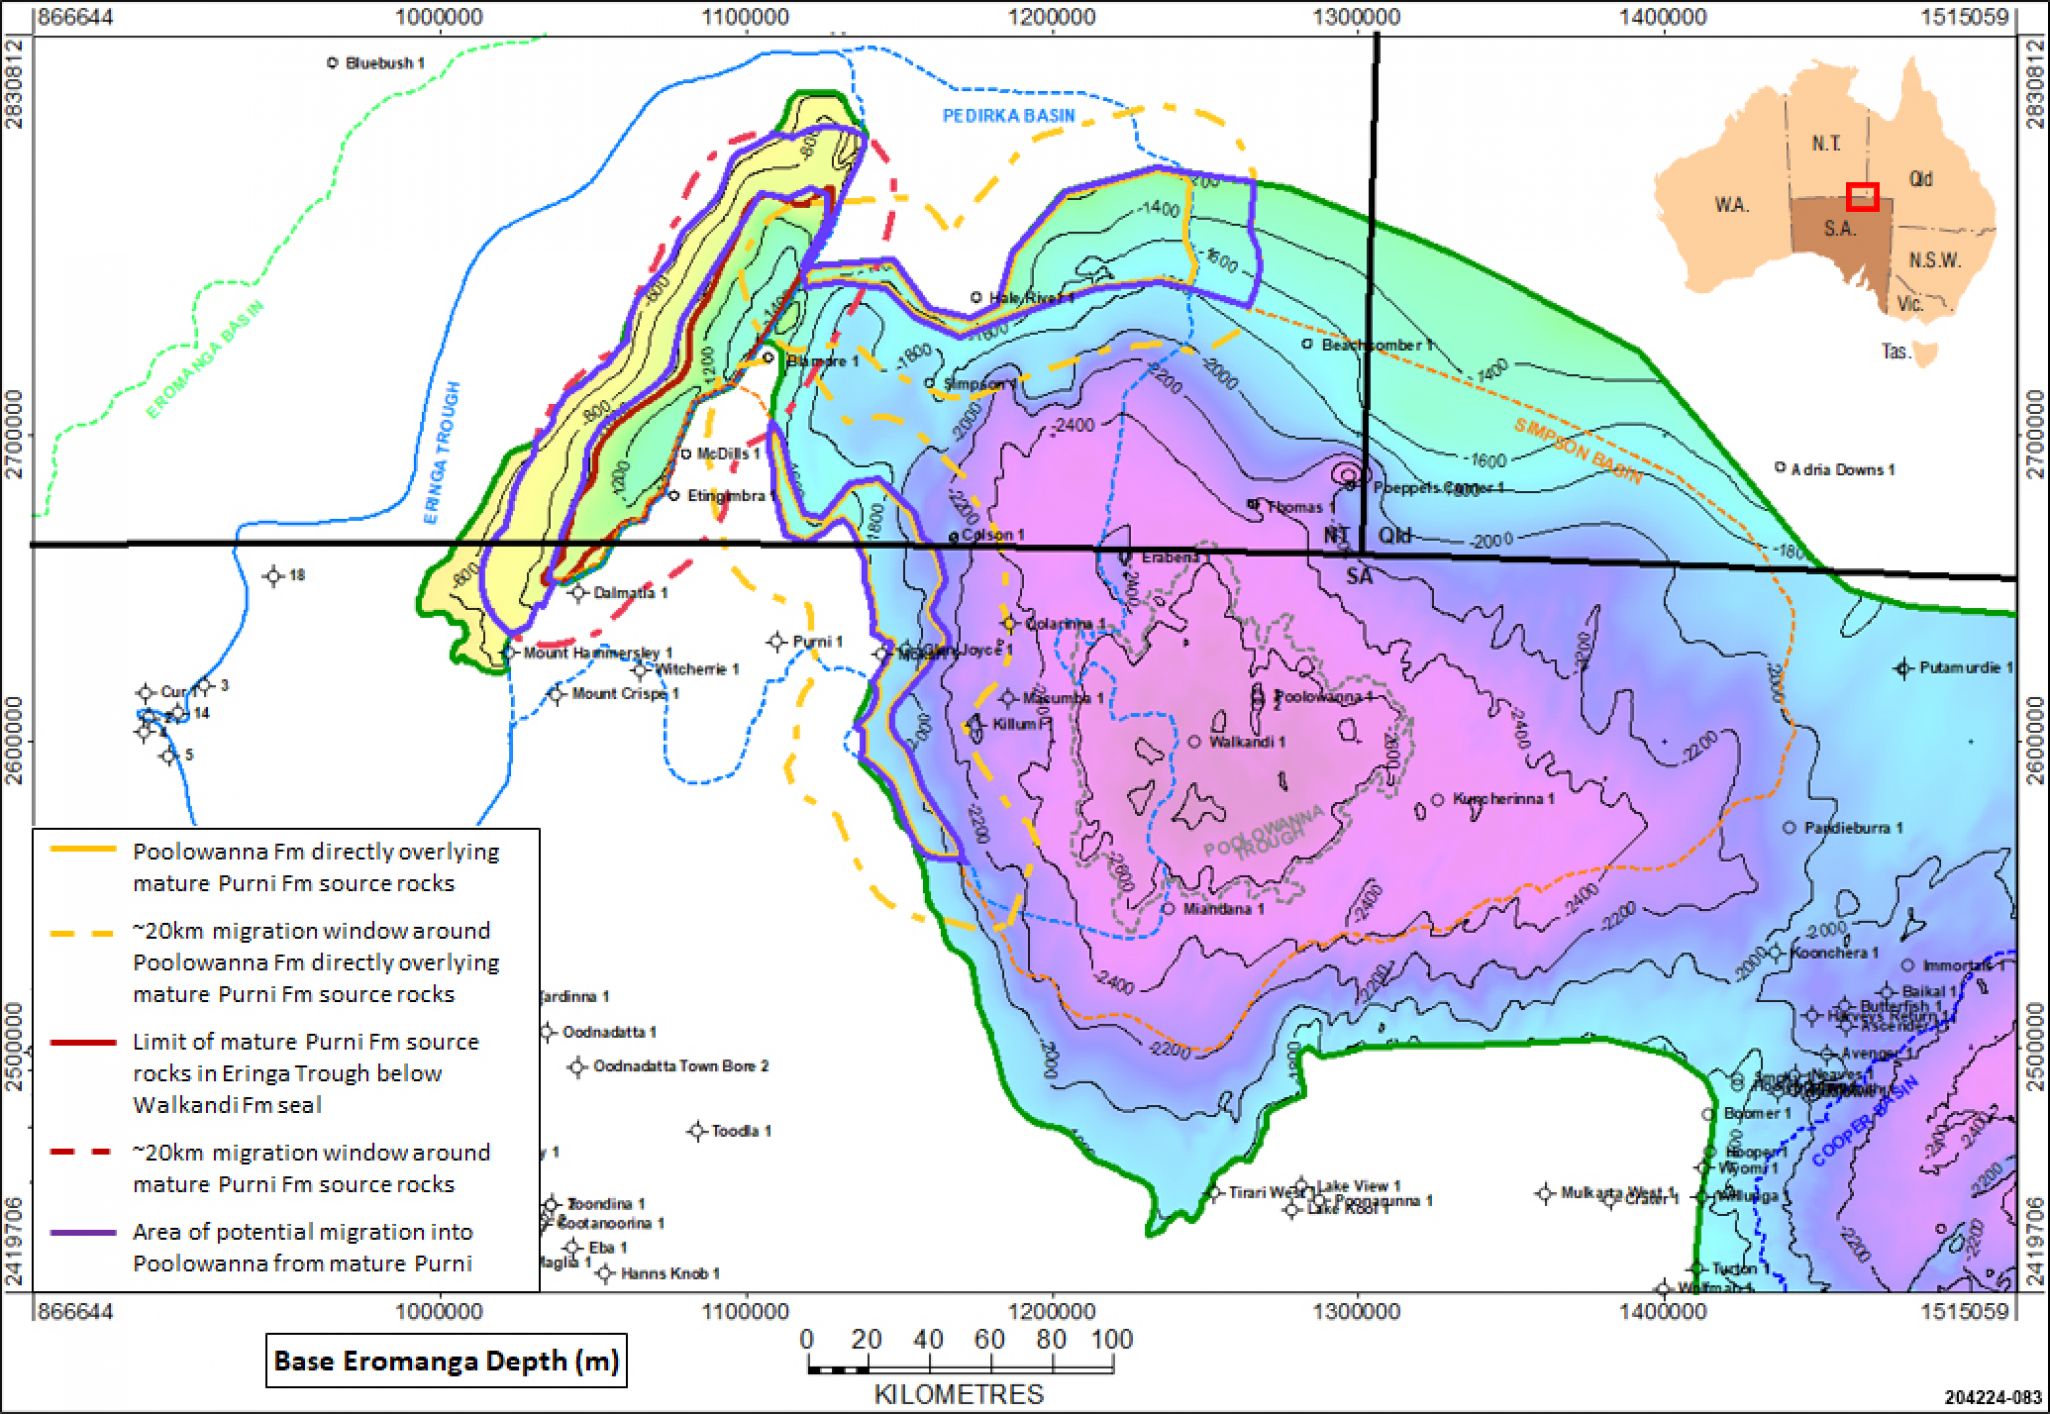 Potential limit of migration extent from marginally mature Purni Formation in the Pedirka Basin